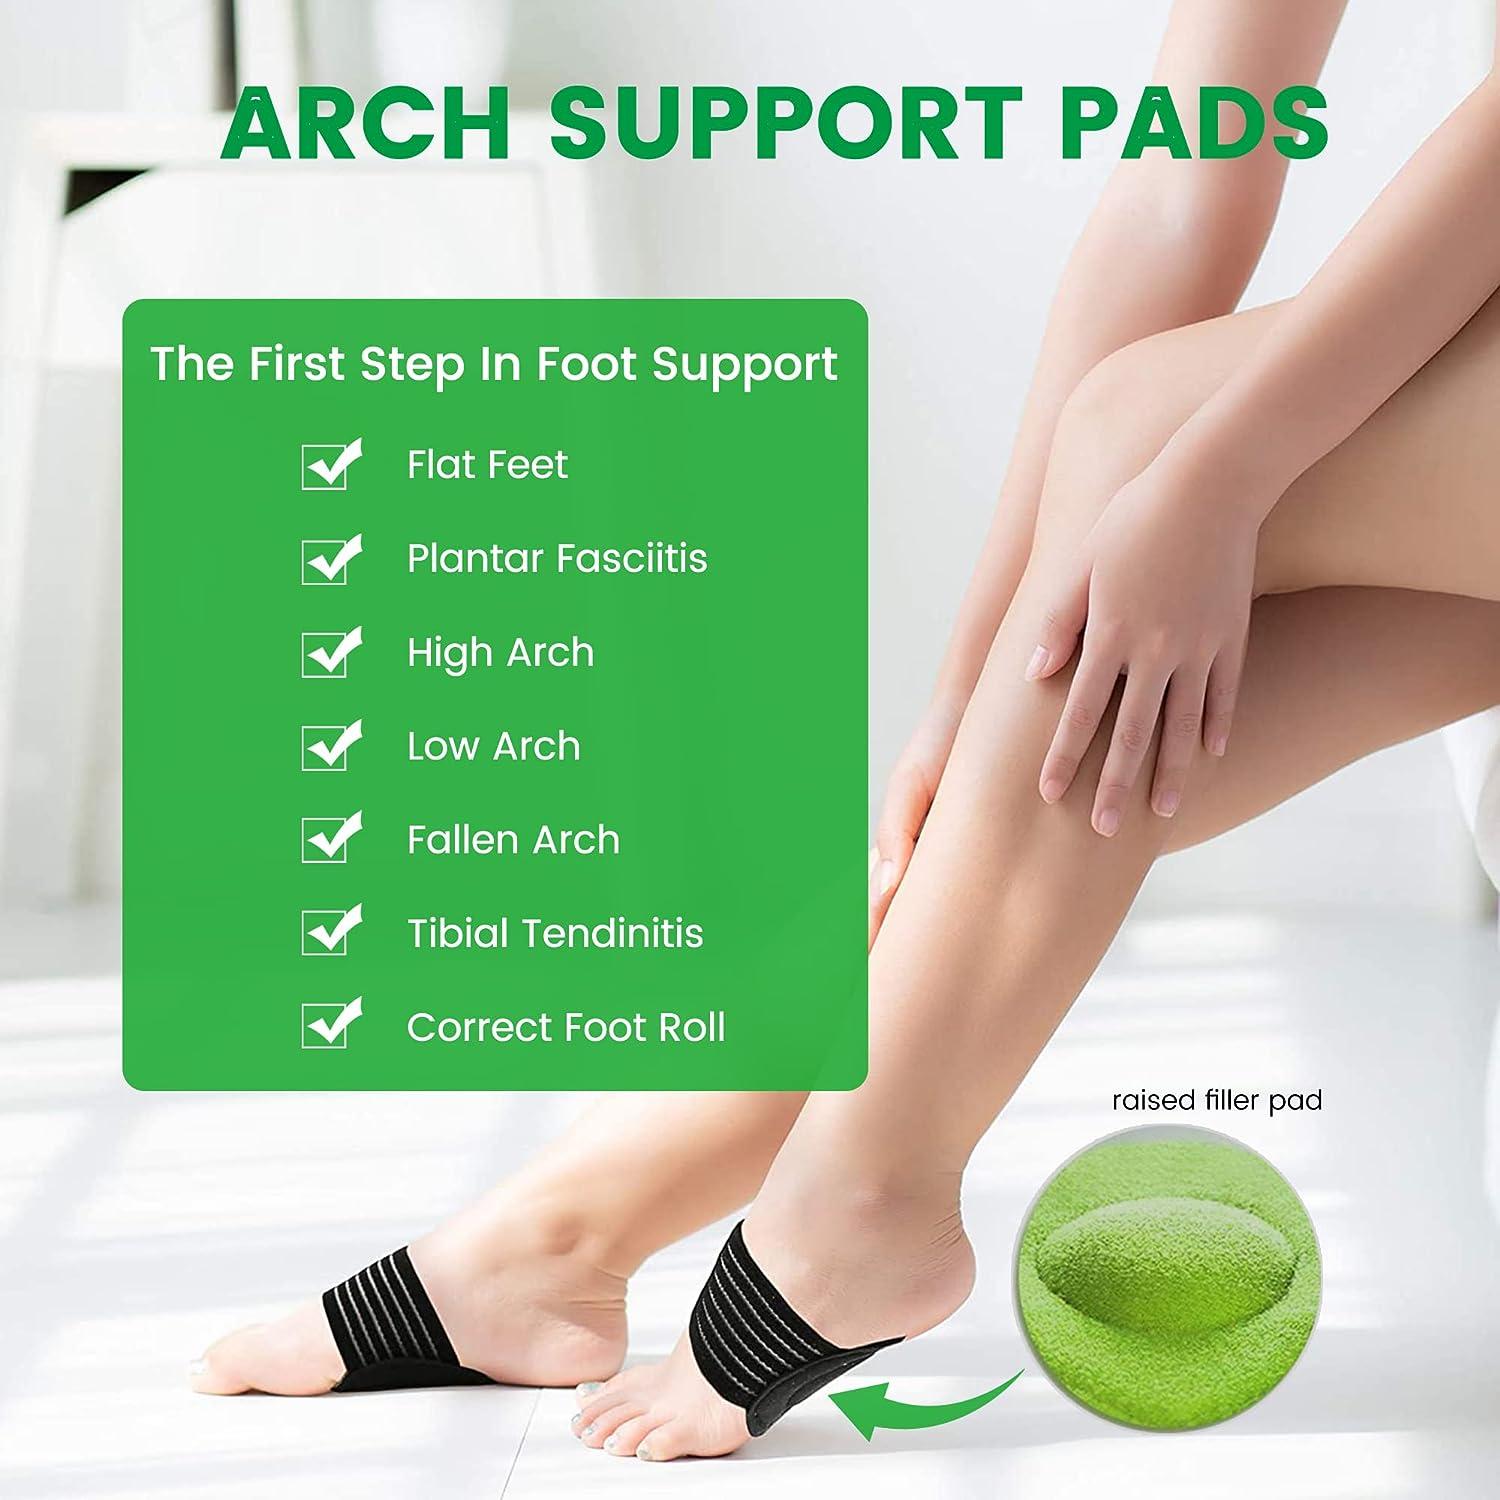 Extra Thick Cushioned Compression Arch Support with More Padded Comfort for  Plantar Fasciitis, Fallen Arches, Heel Spurs, Flat Feet and Achy Foot Pain